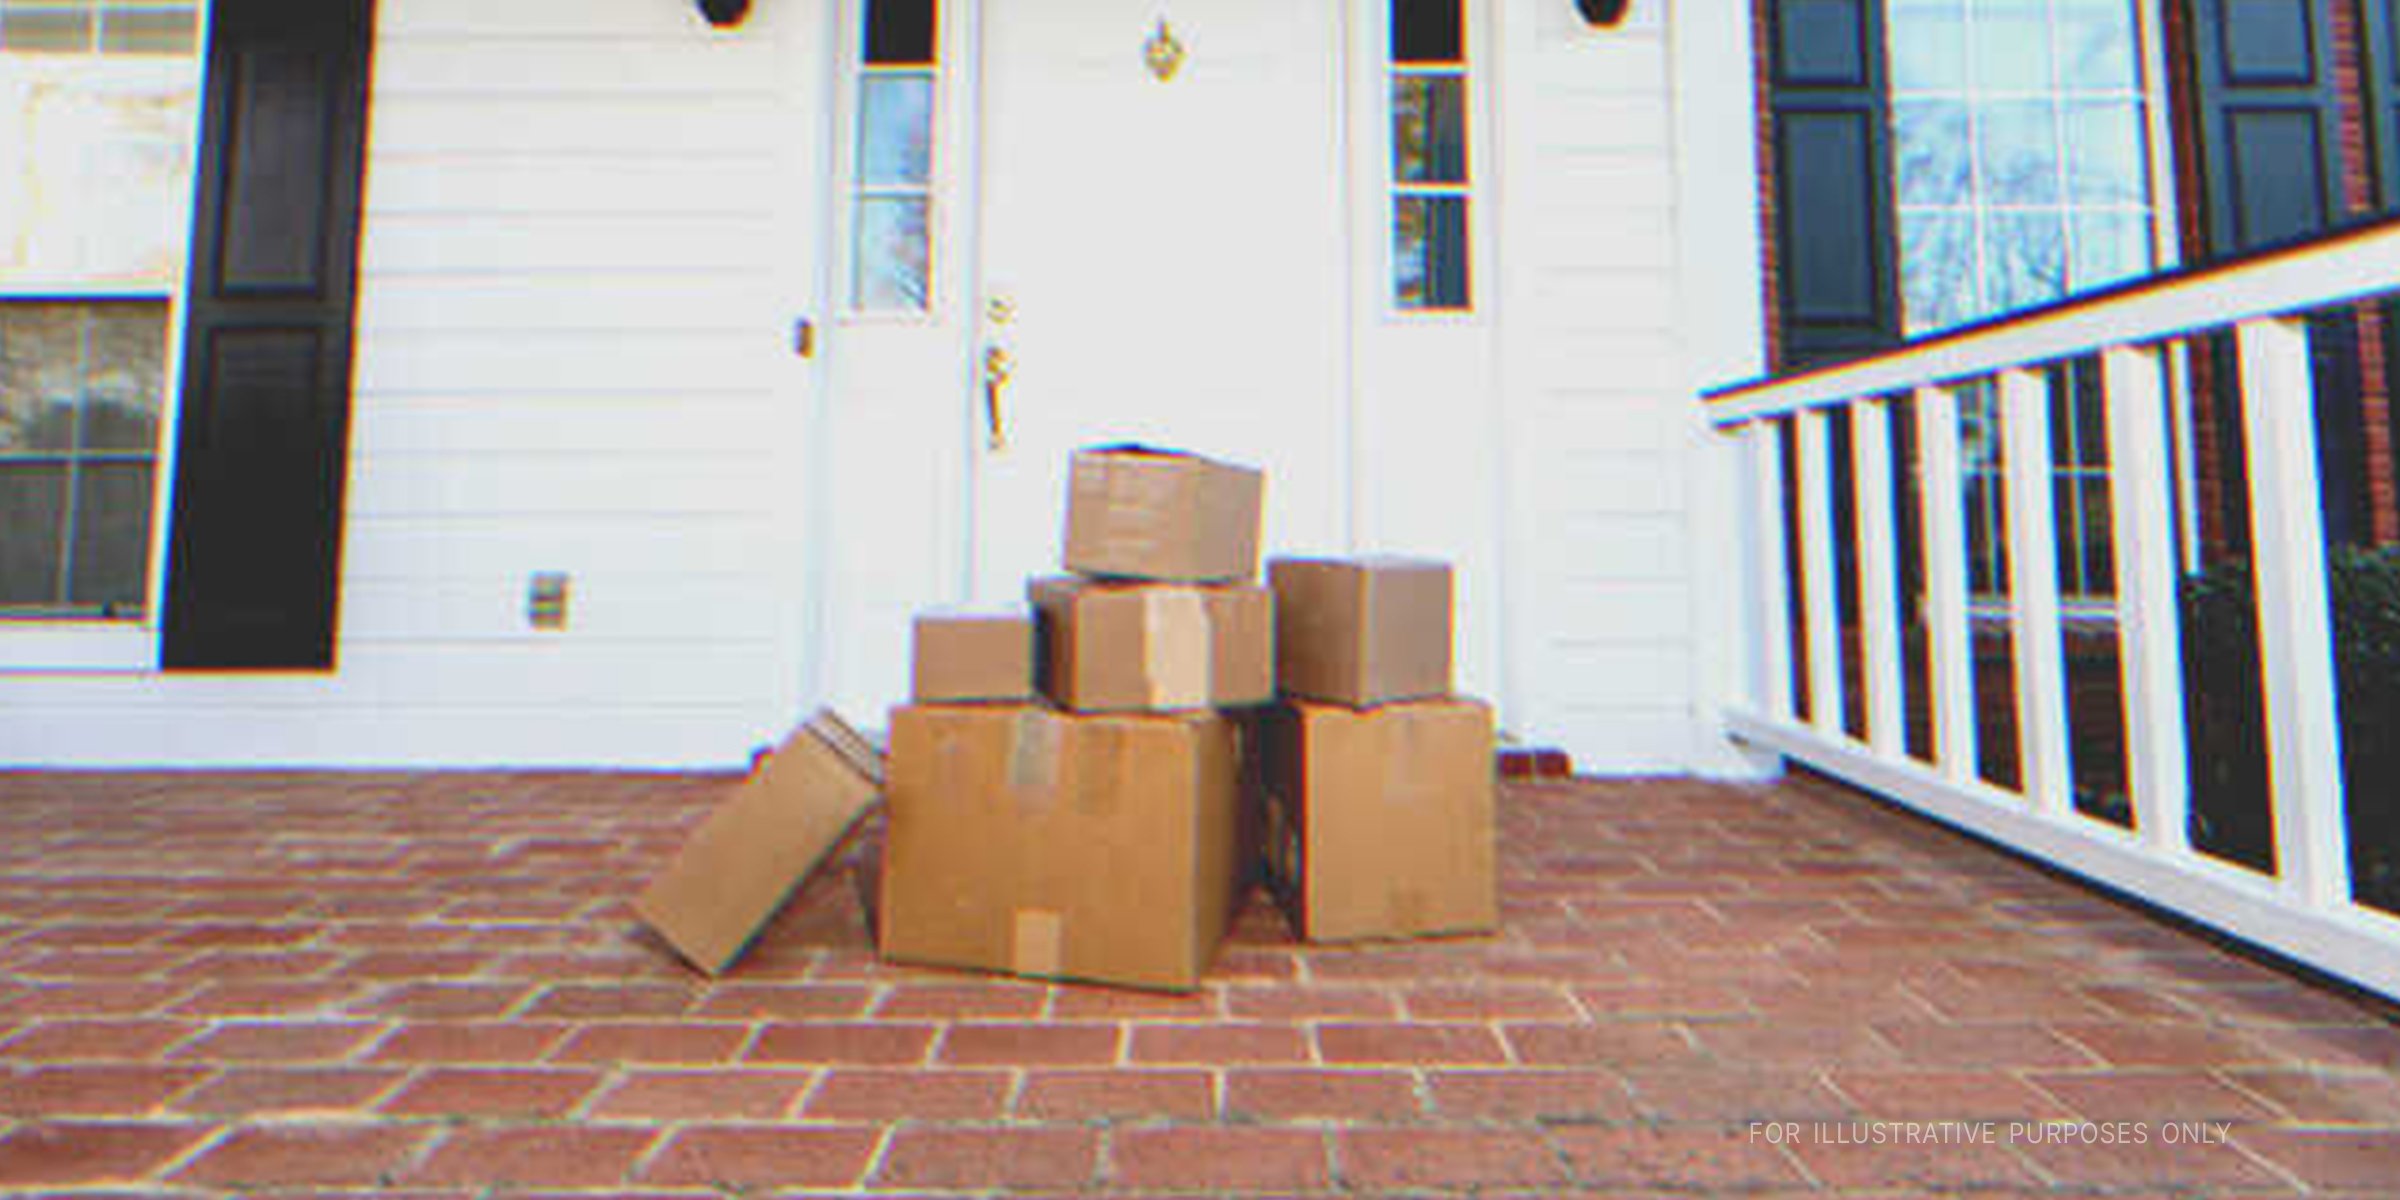 A stack of cardboard boxes on doorstep | Source: Shutterstock